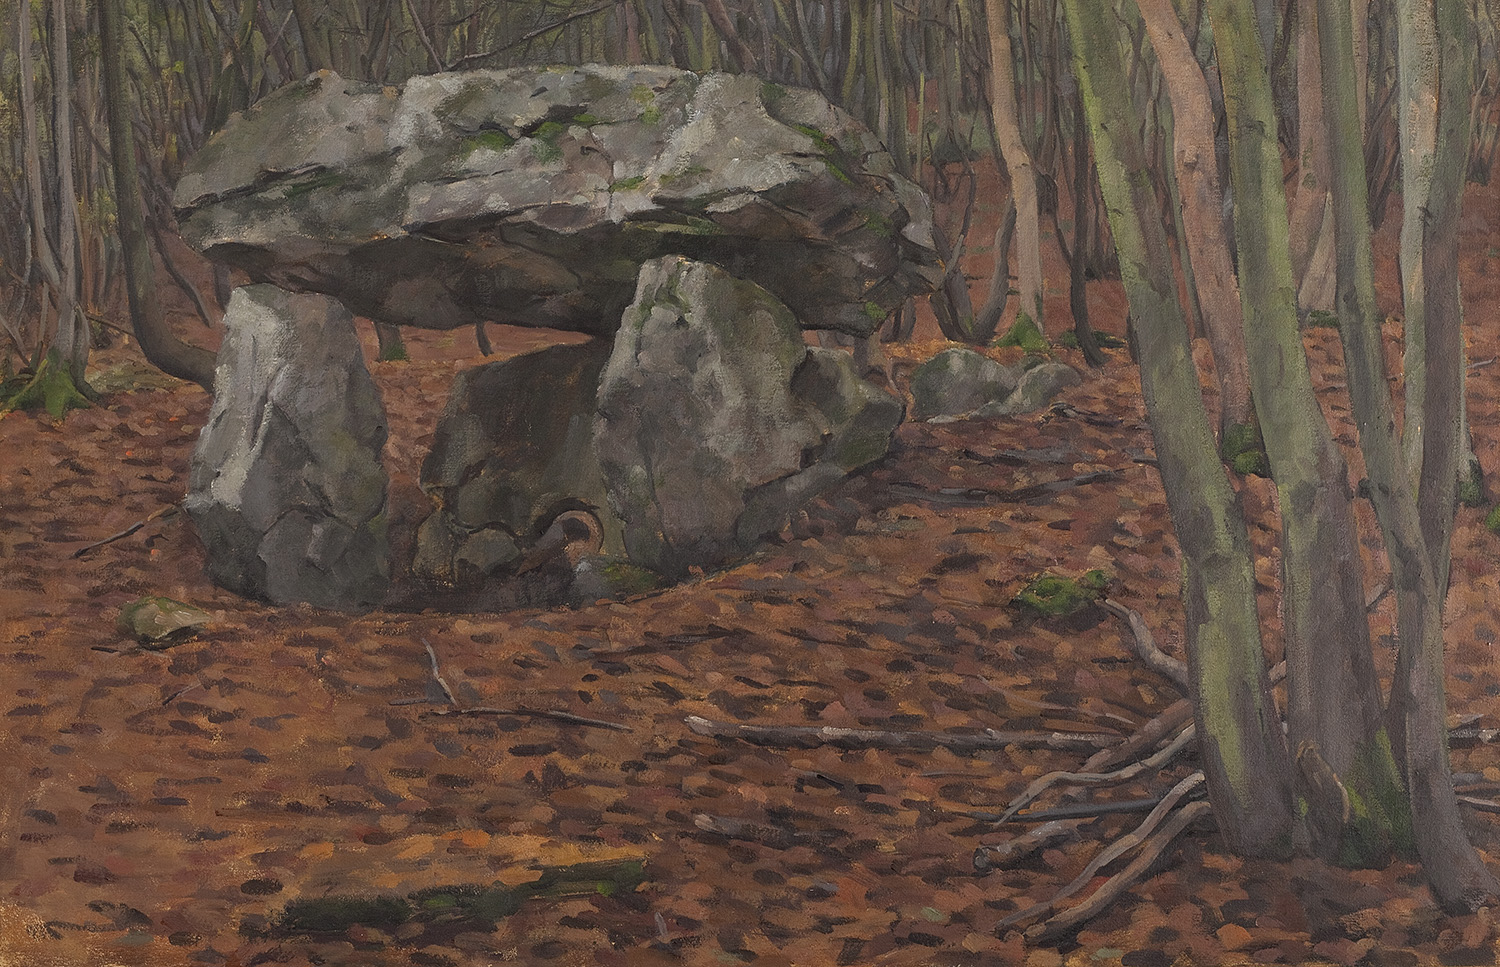 dolmen, Trie-Chateau by Frederick Ortner (larger)